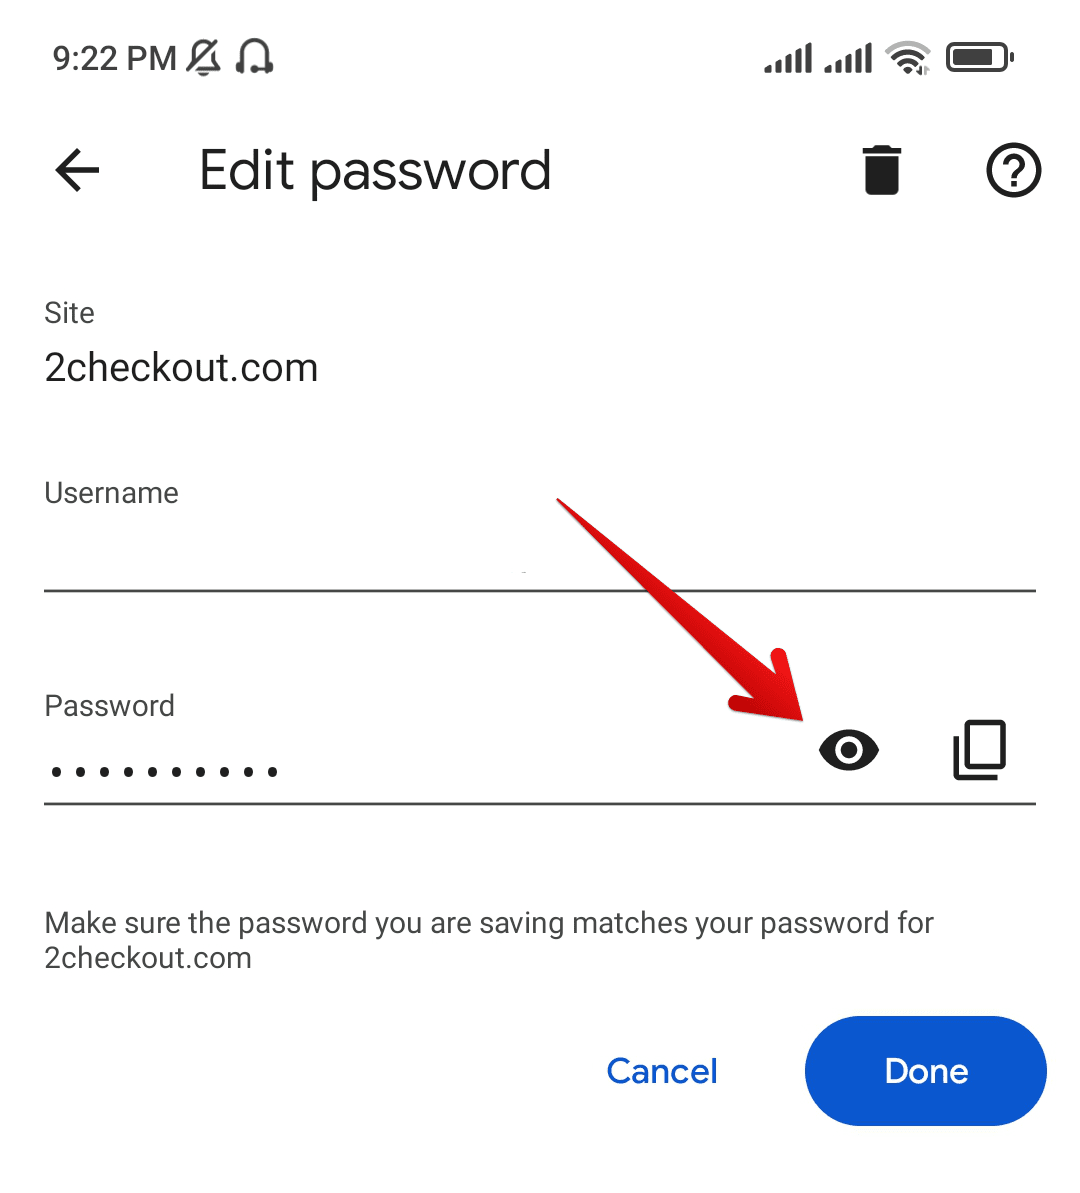 Viewing The Password